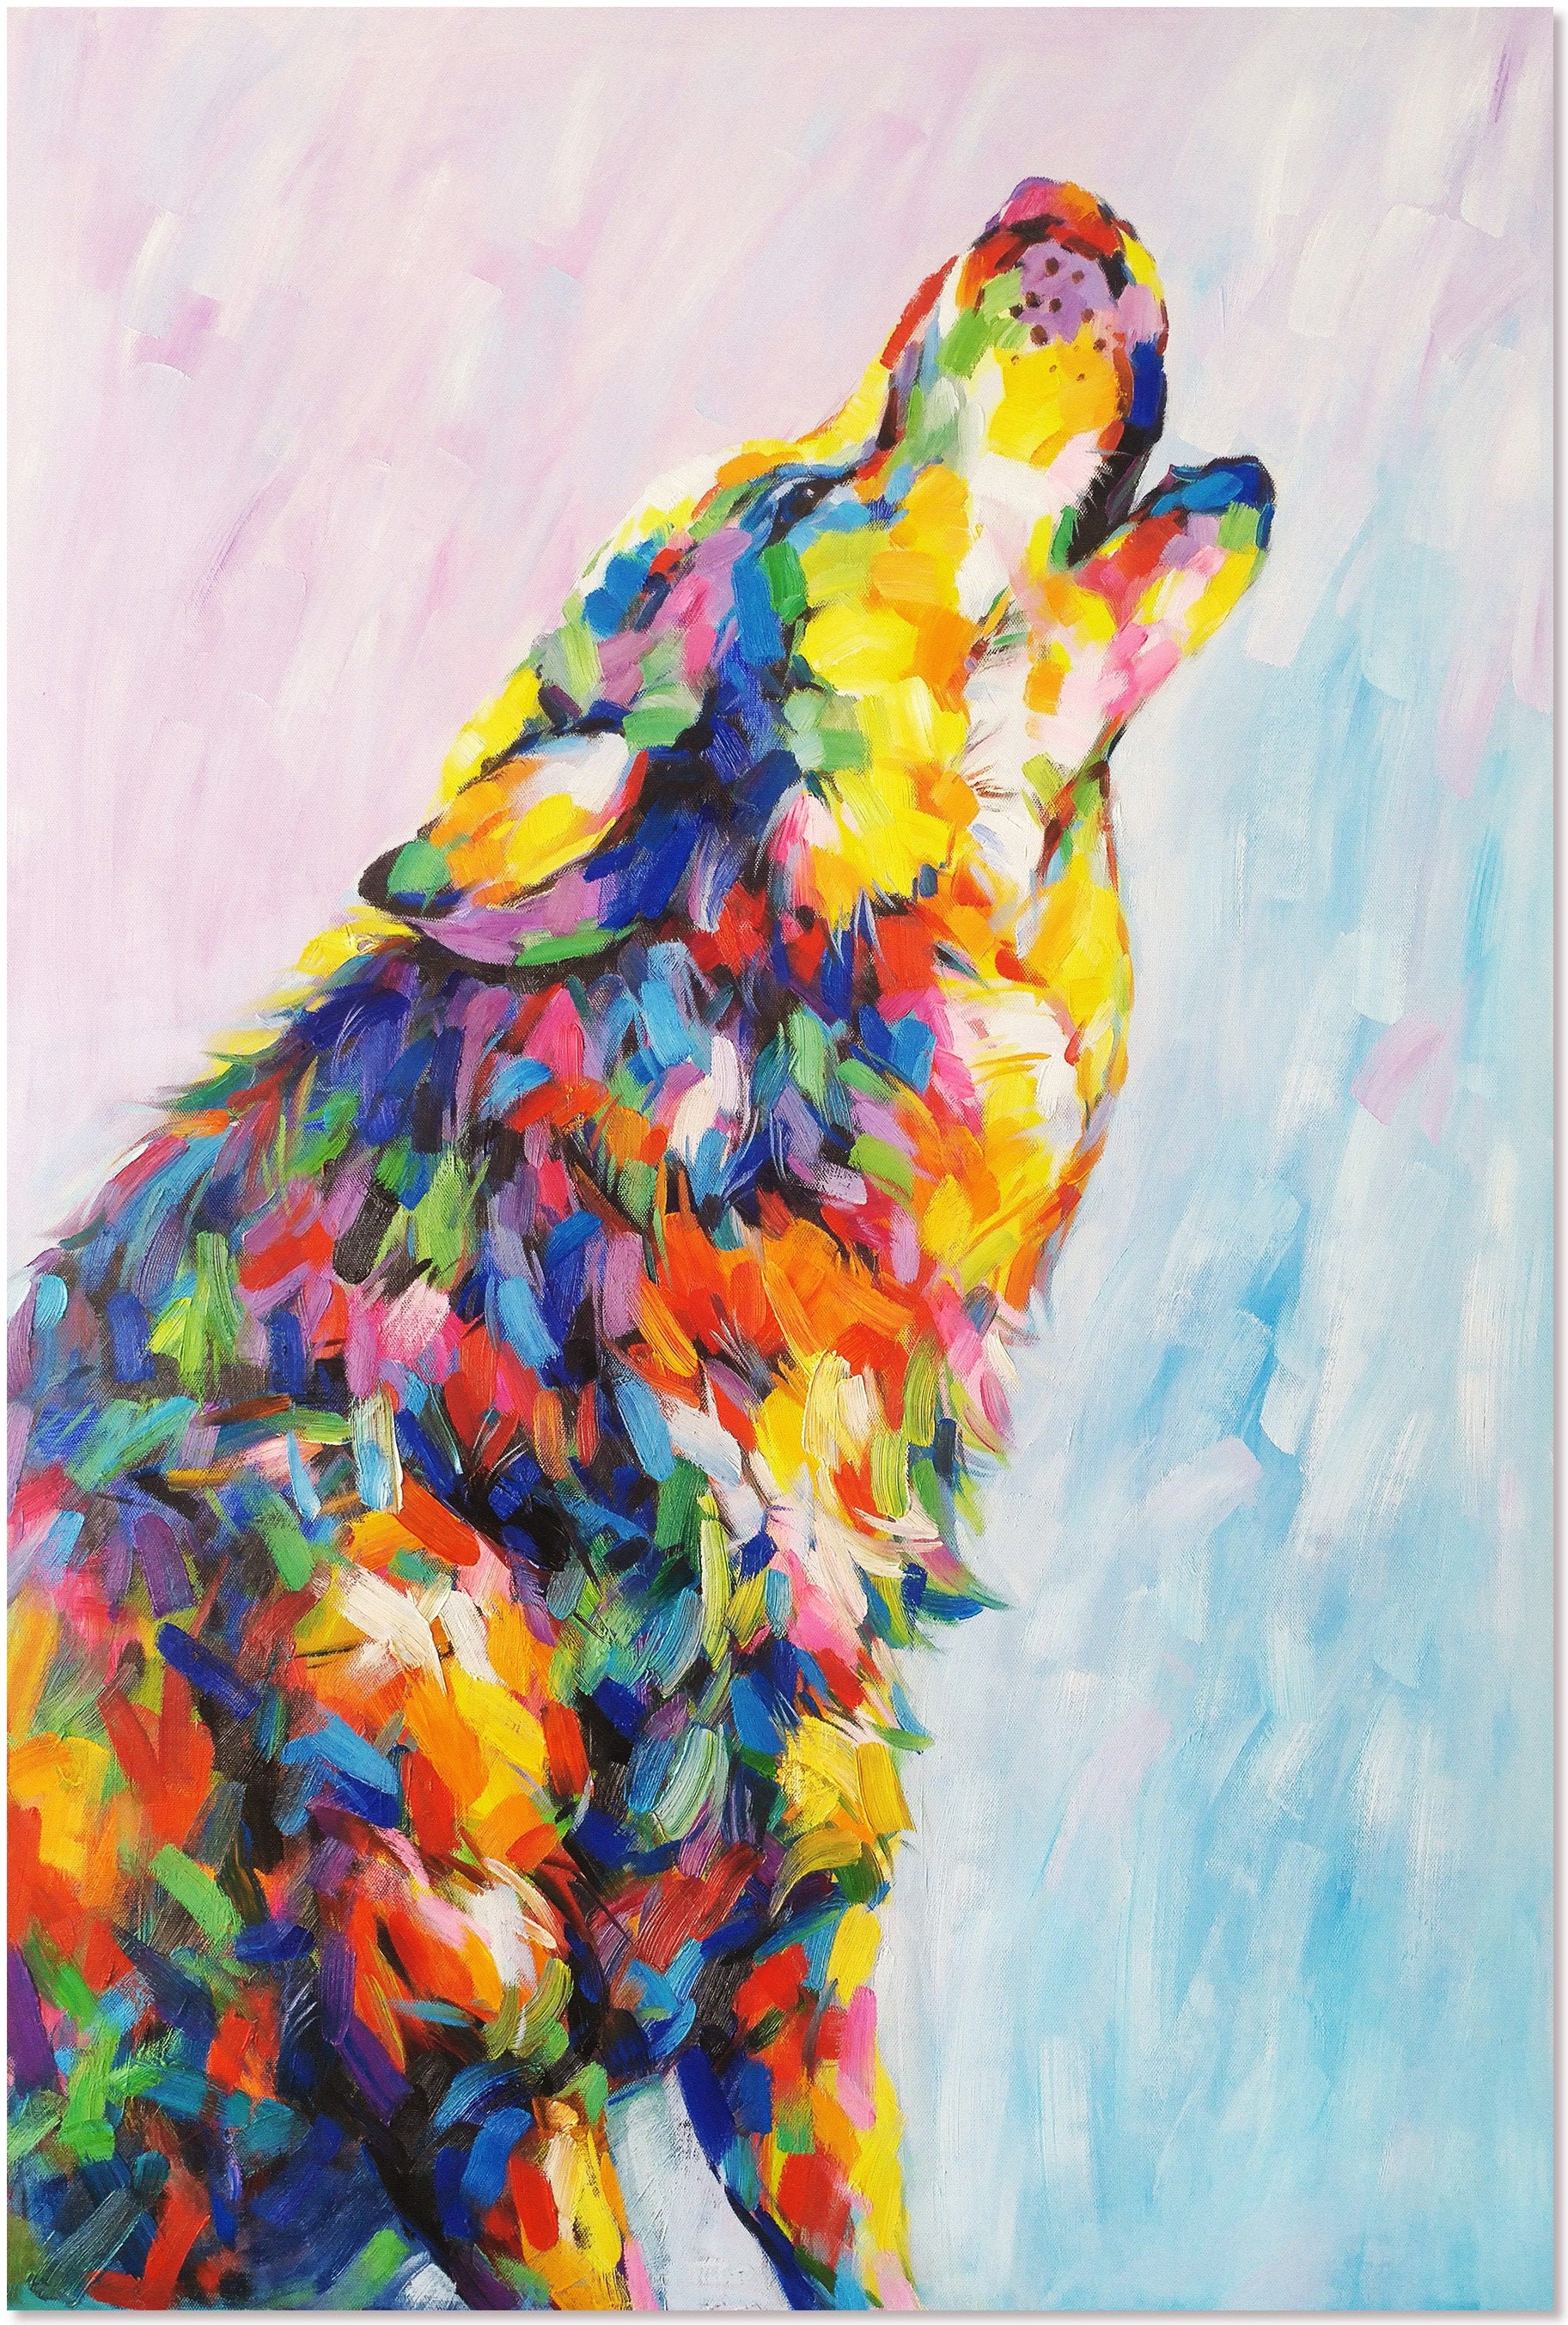 Wolf Watercolor Project Kit– Let's Make Art